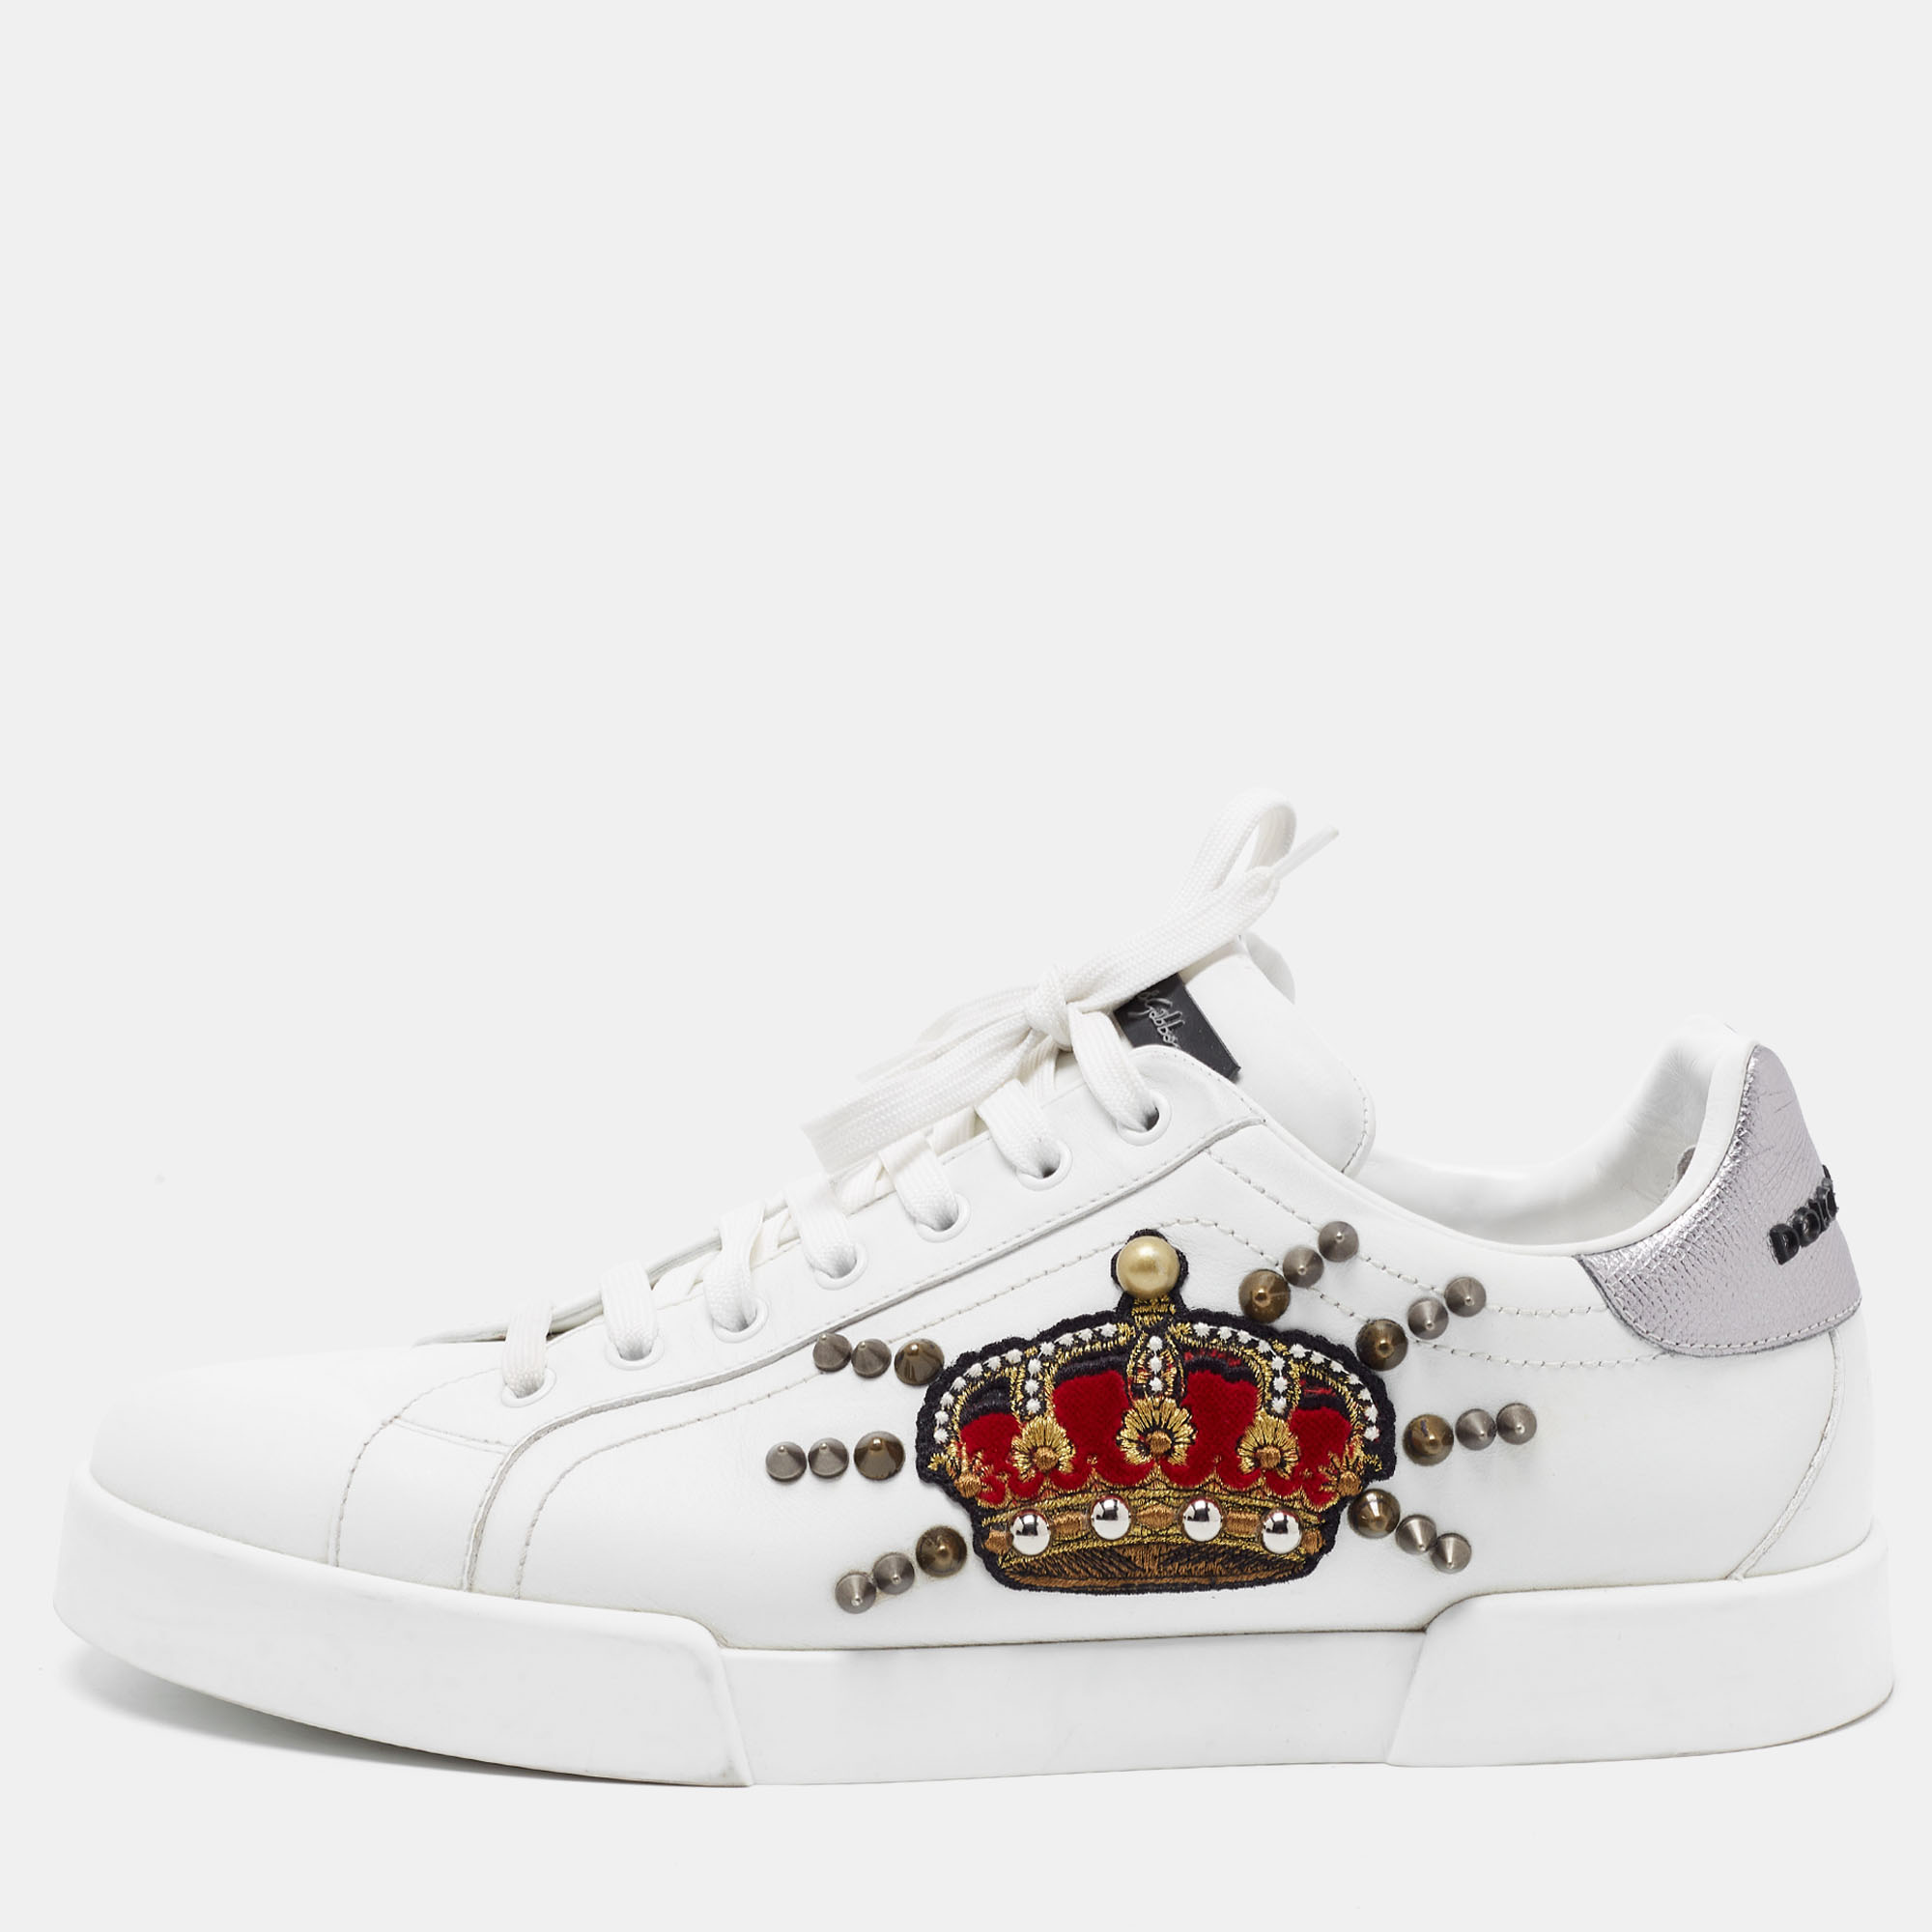 Pre-owned Dolce & Gabbana White Leather Portofino Low Top Sneakers Size 44.5